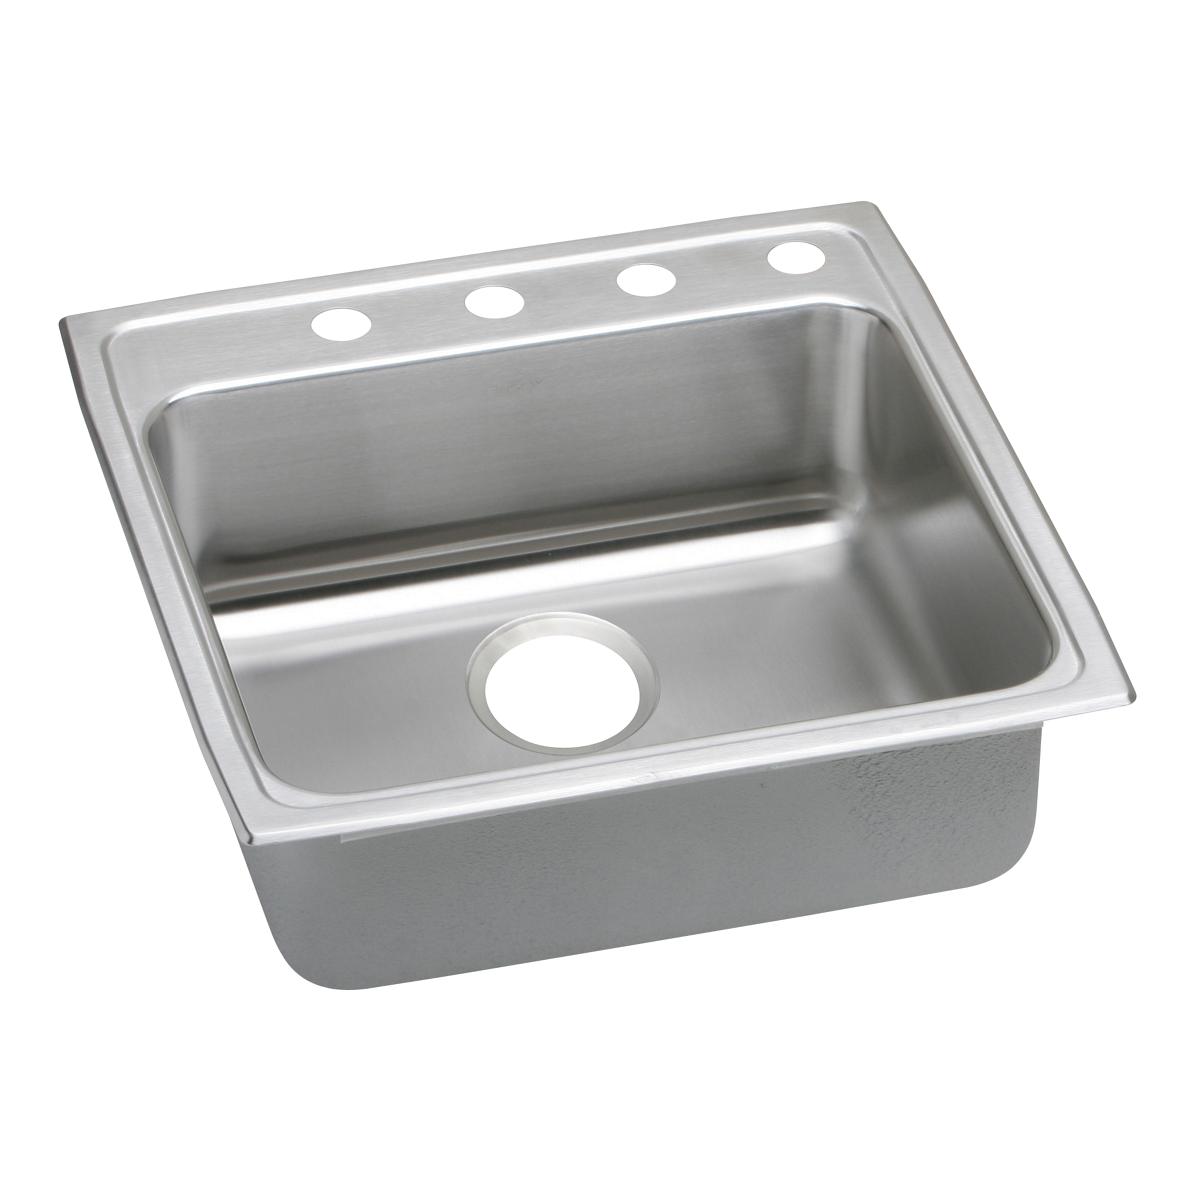 Elkay Lustertone Classic 22" x 22" x 6" MR2-Hole Single Bowl Drop-in ADA Sink with Quick-clip